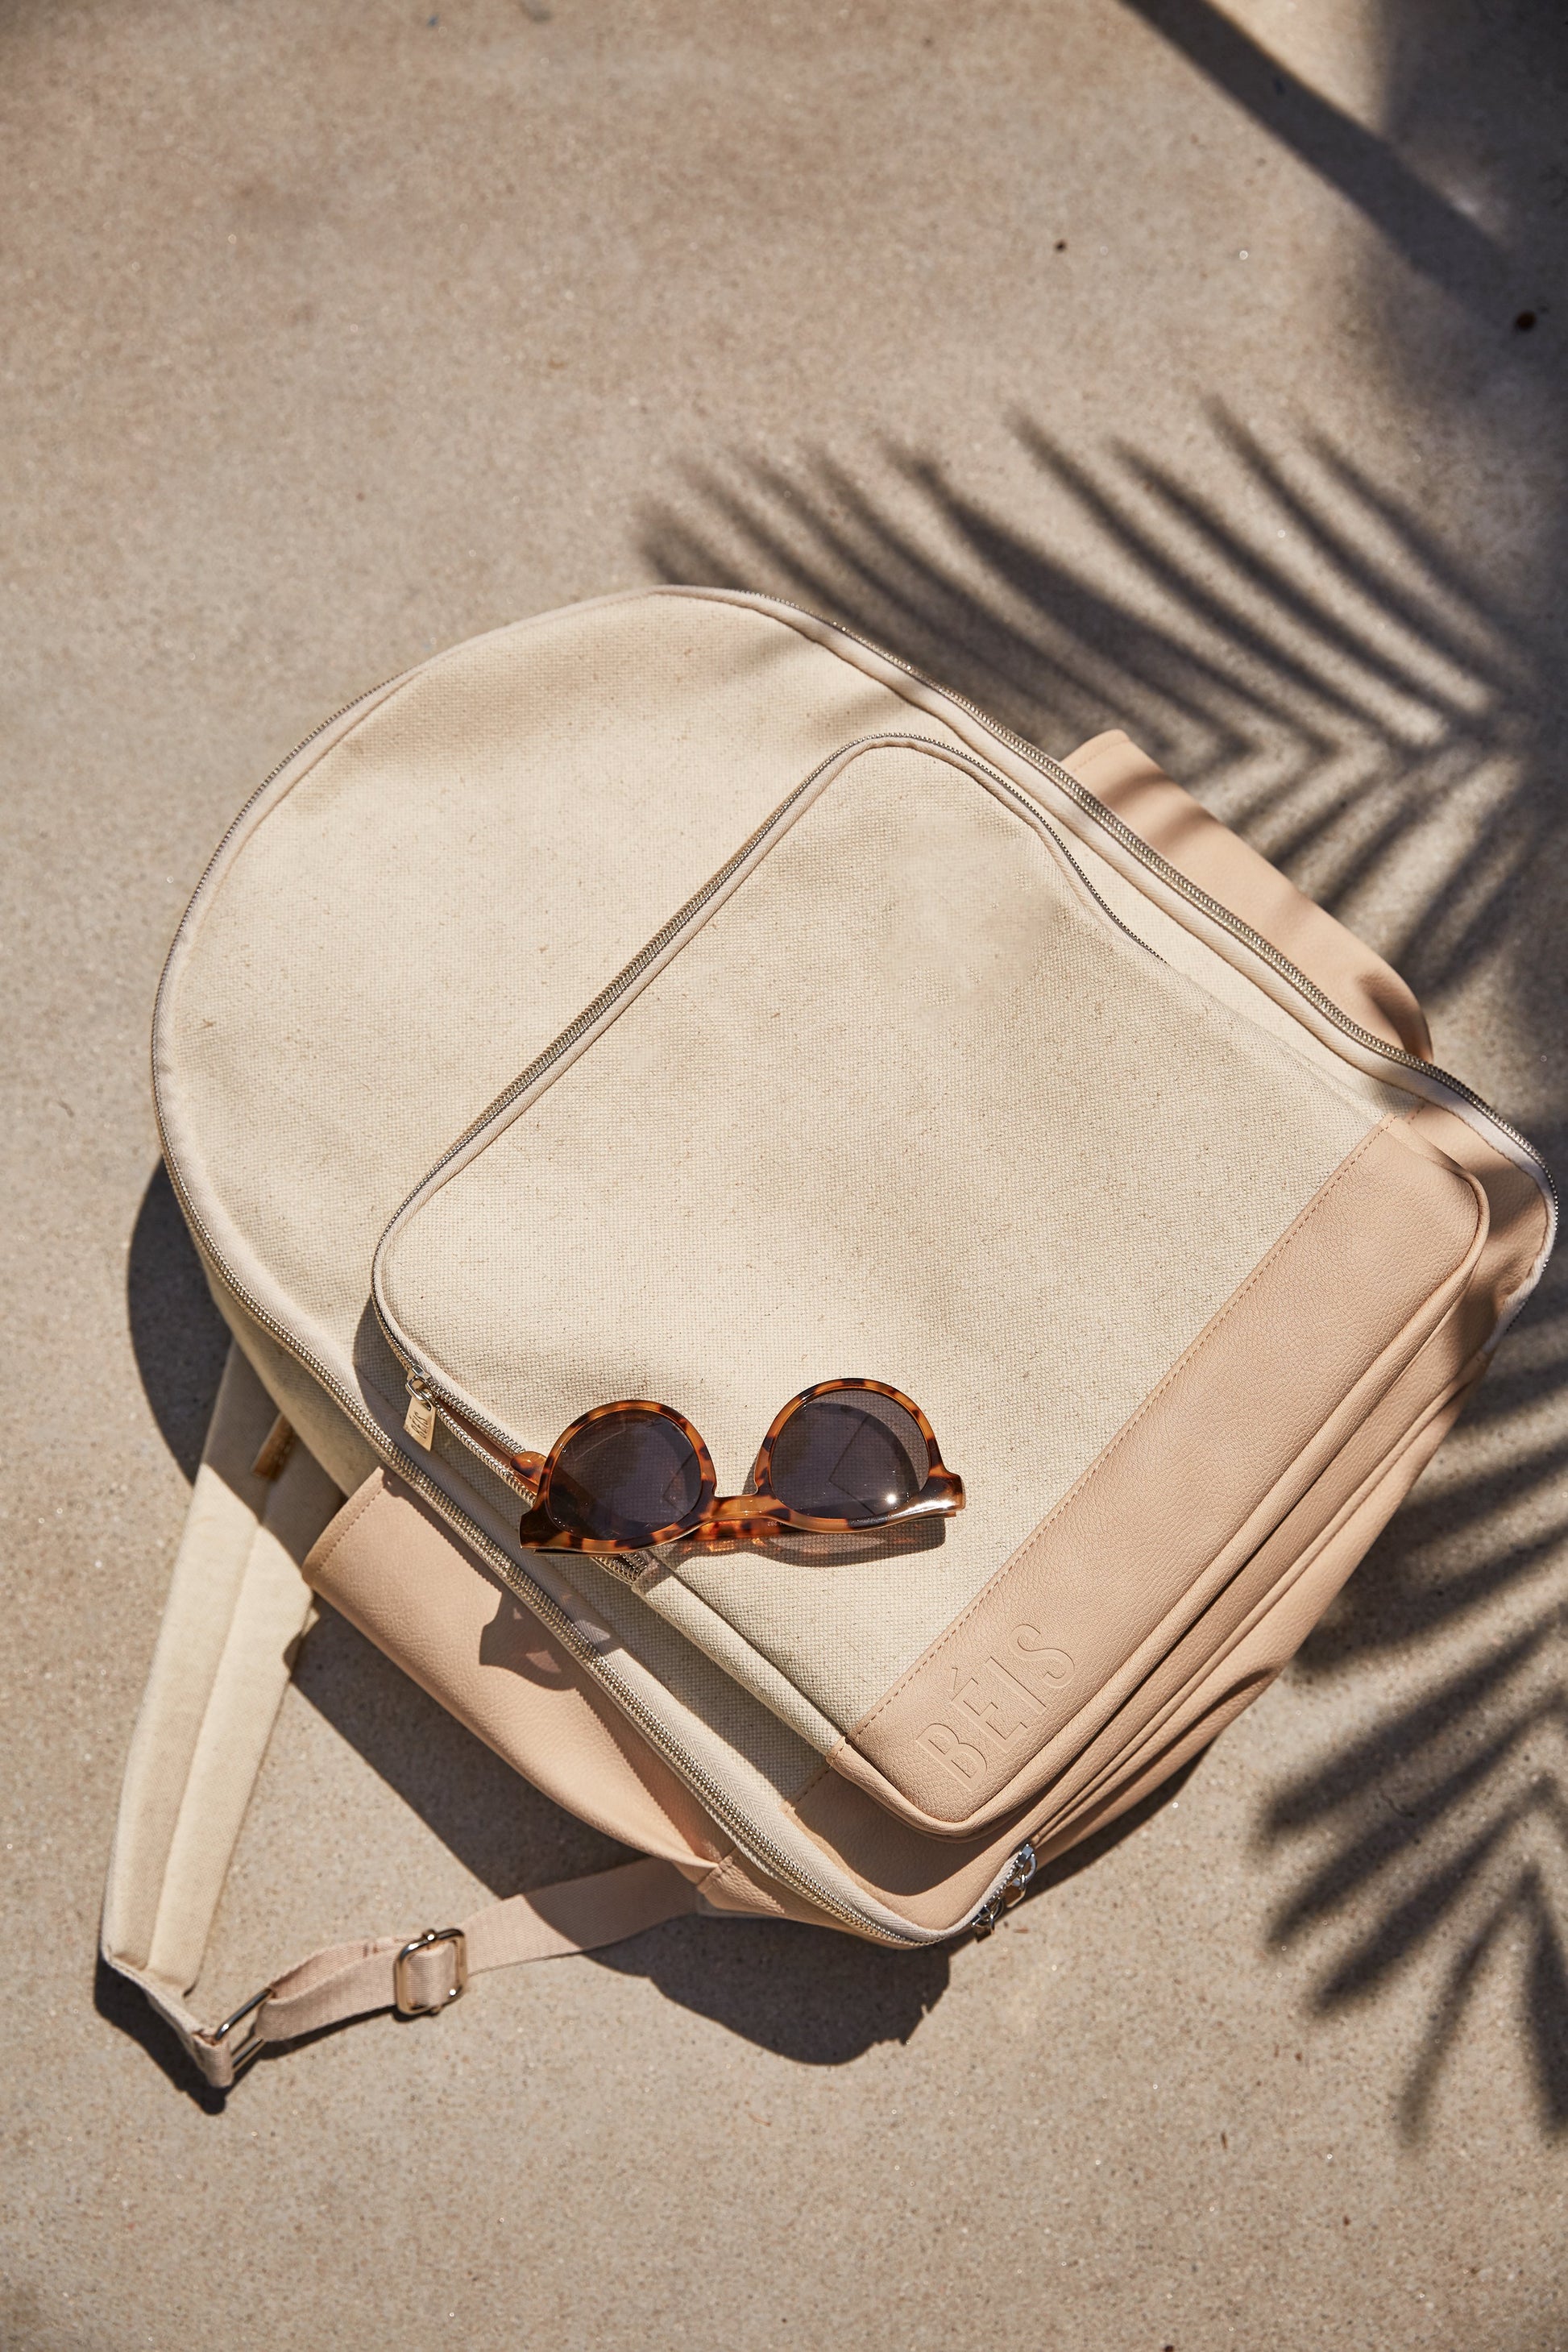 BEIS by Shay Mitchell | The Backpack in Beige - Flat lay